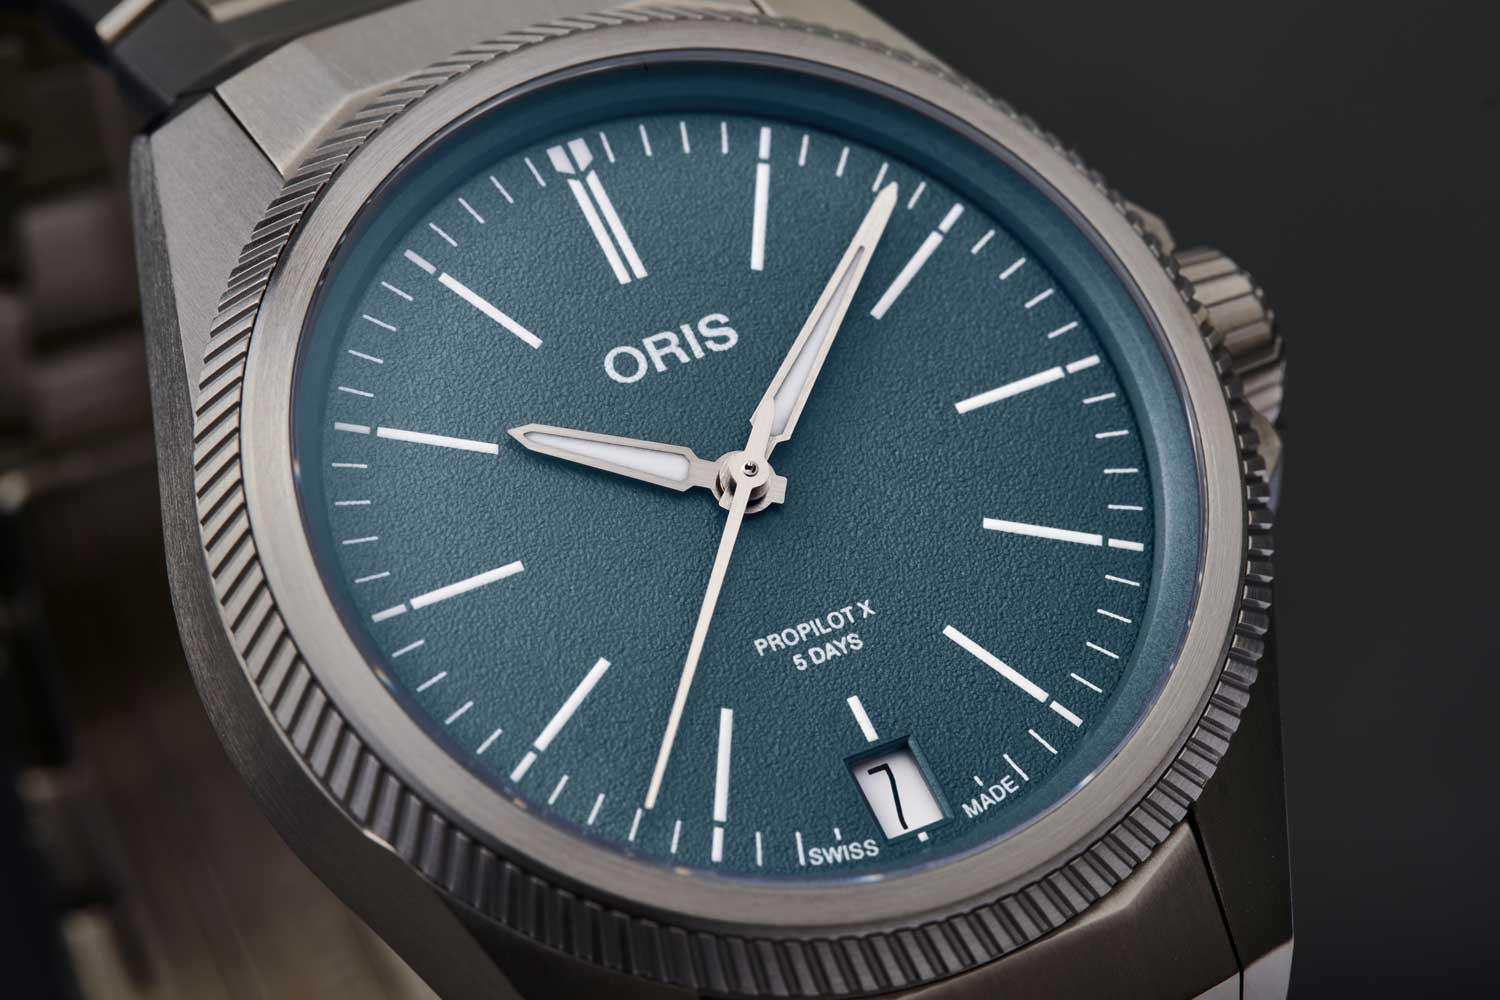 With a noticeable textured and plain,clear printing, the dial of this Oris favour legibility (Image: Revolution©)